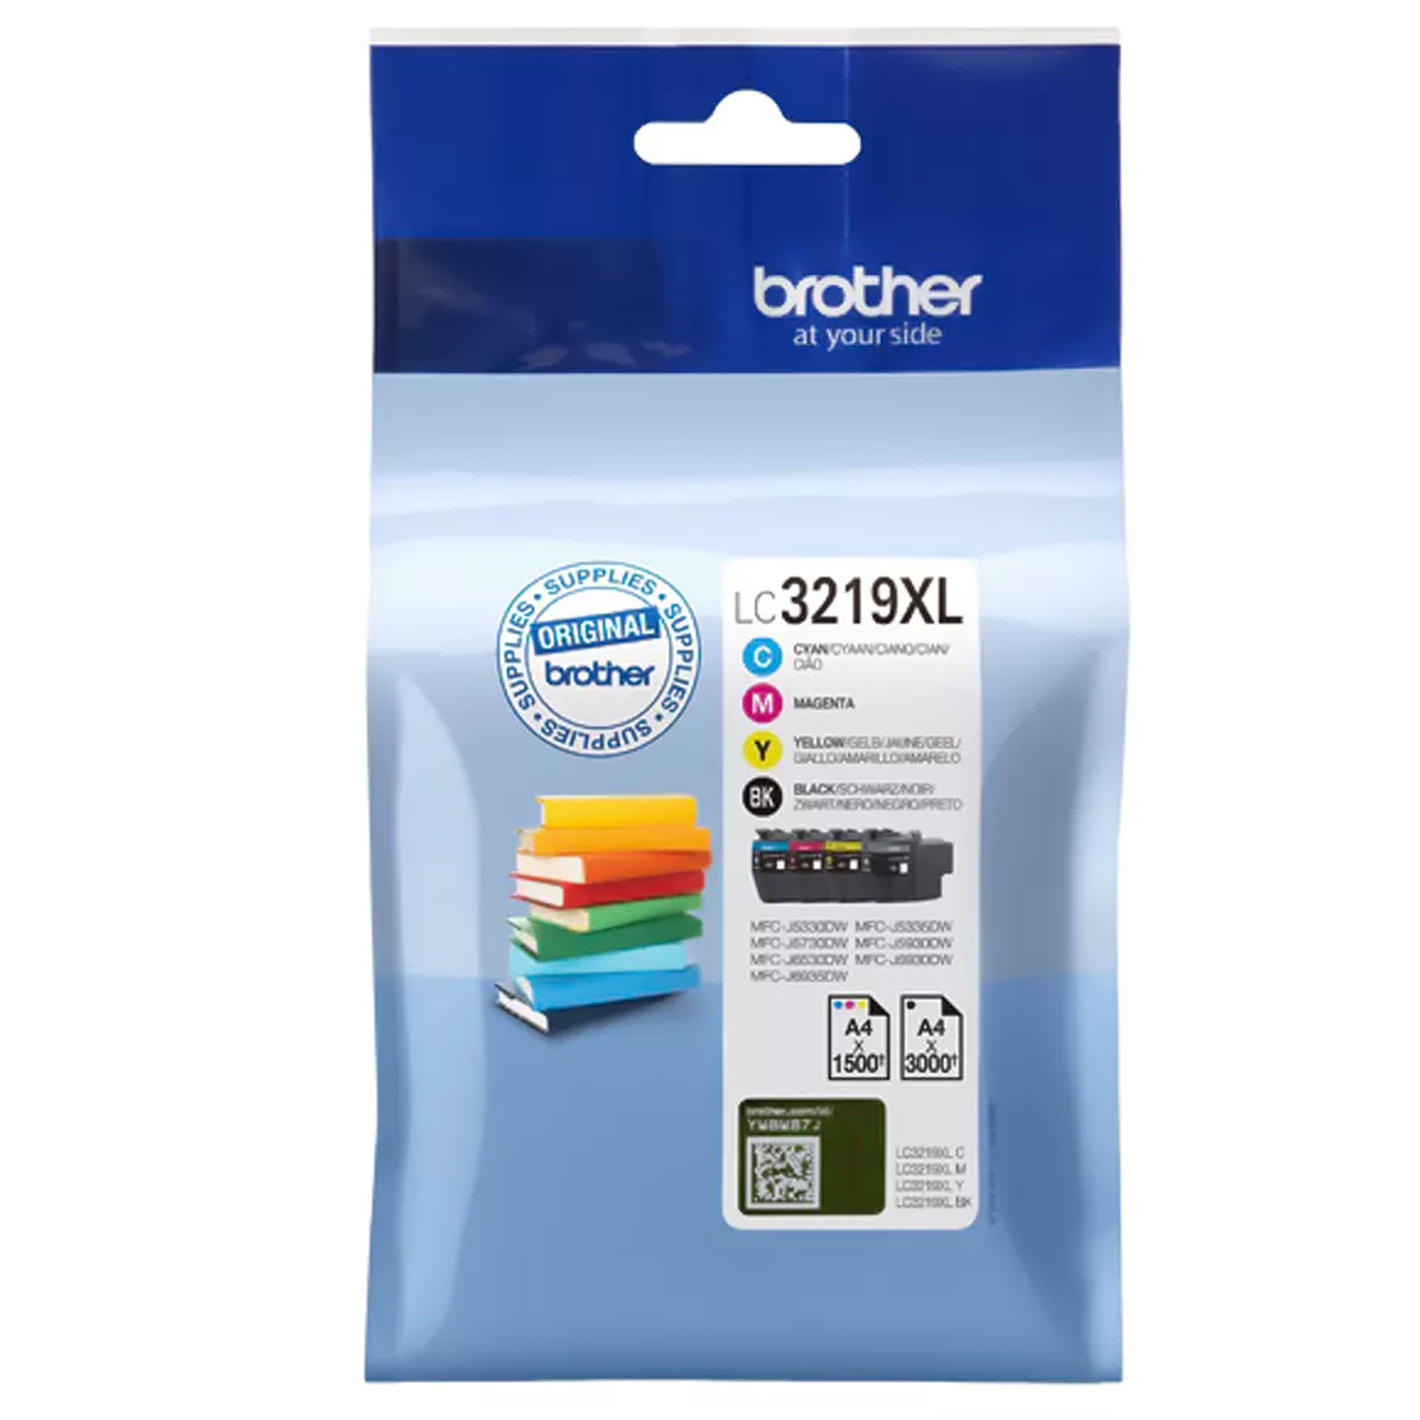 Brother LC-3219XLVAL Ink cartridge multi pack, 3000pg + 3x1500pg,...